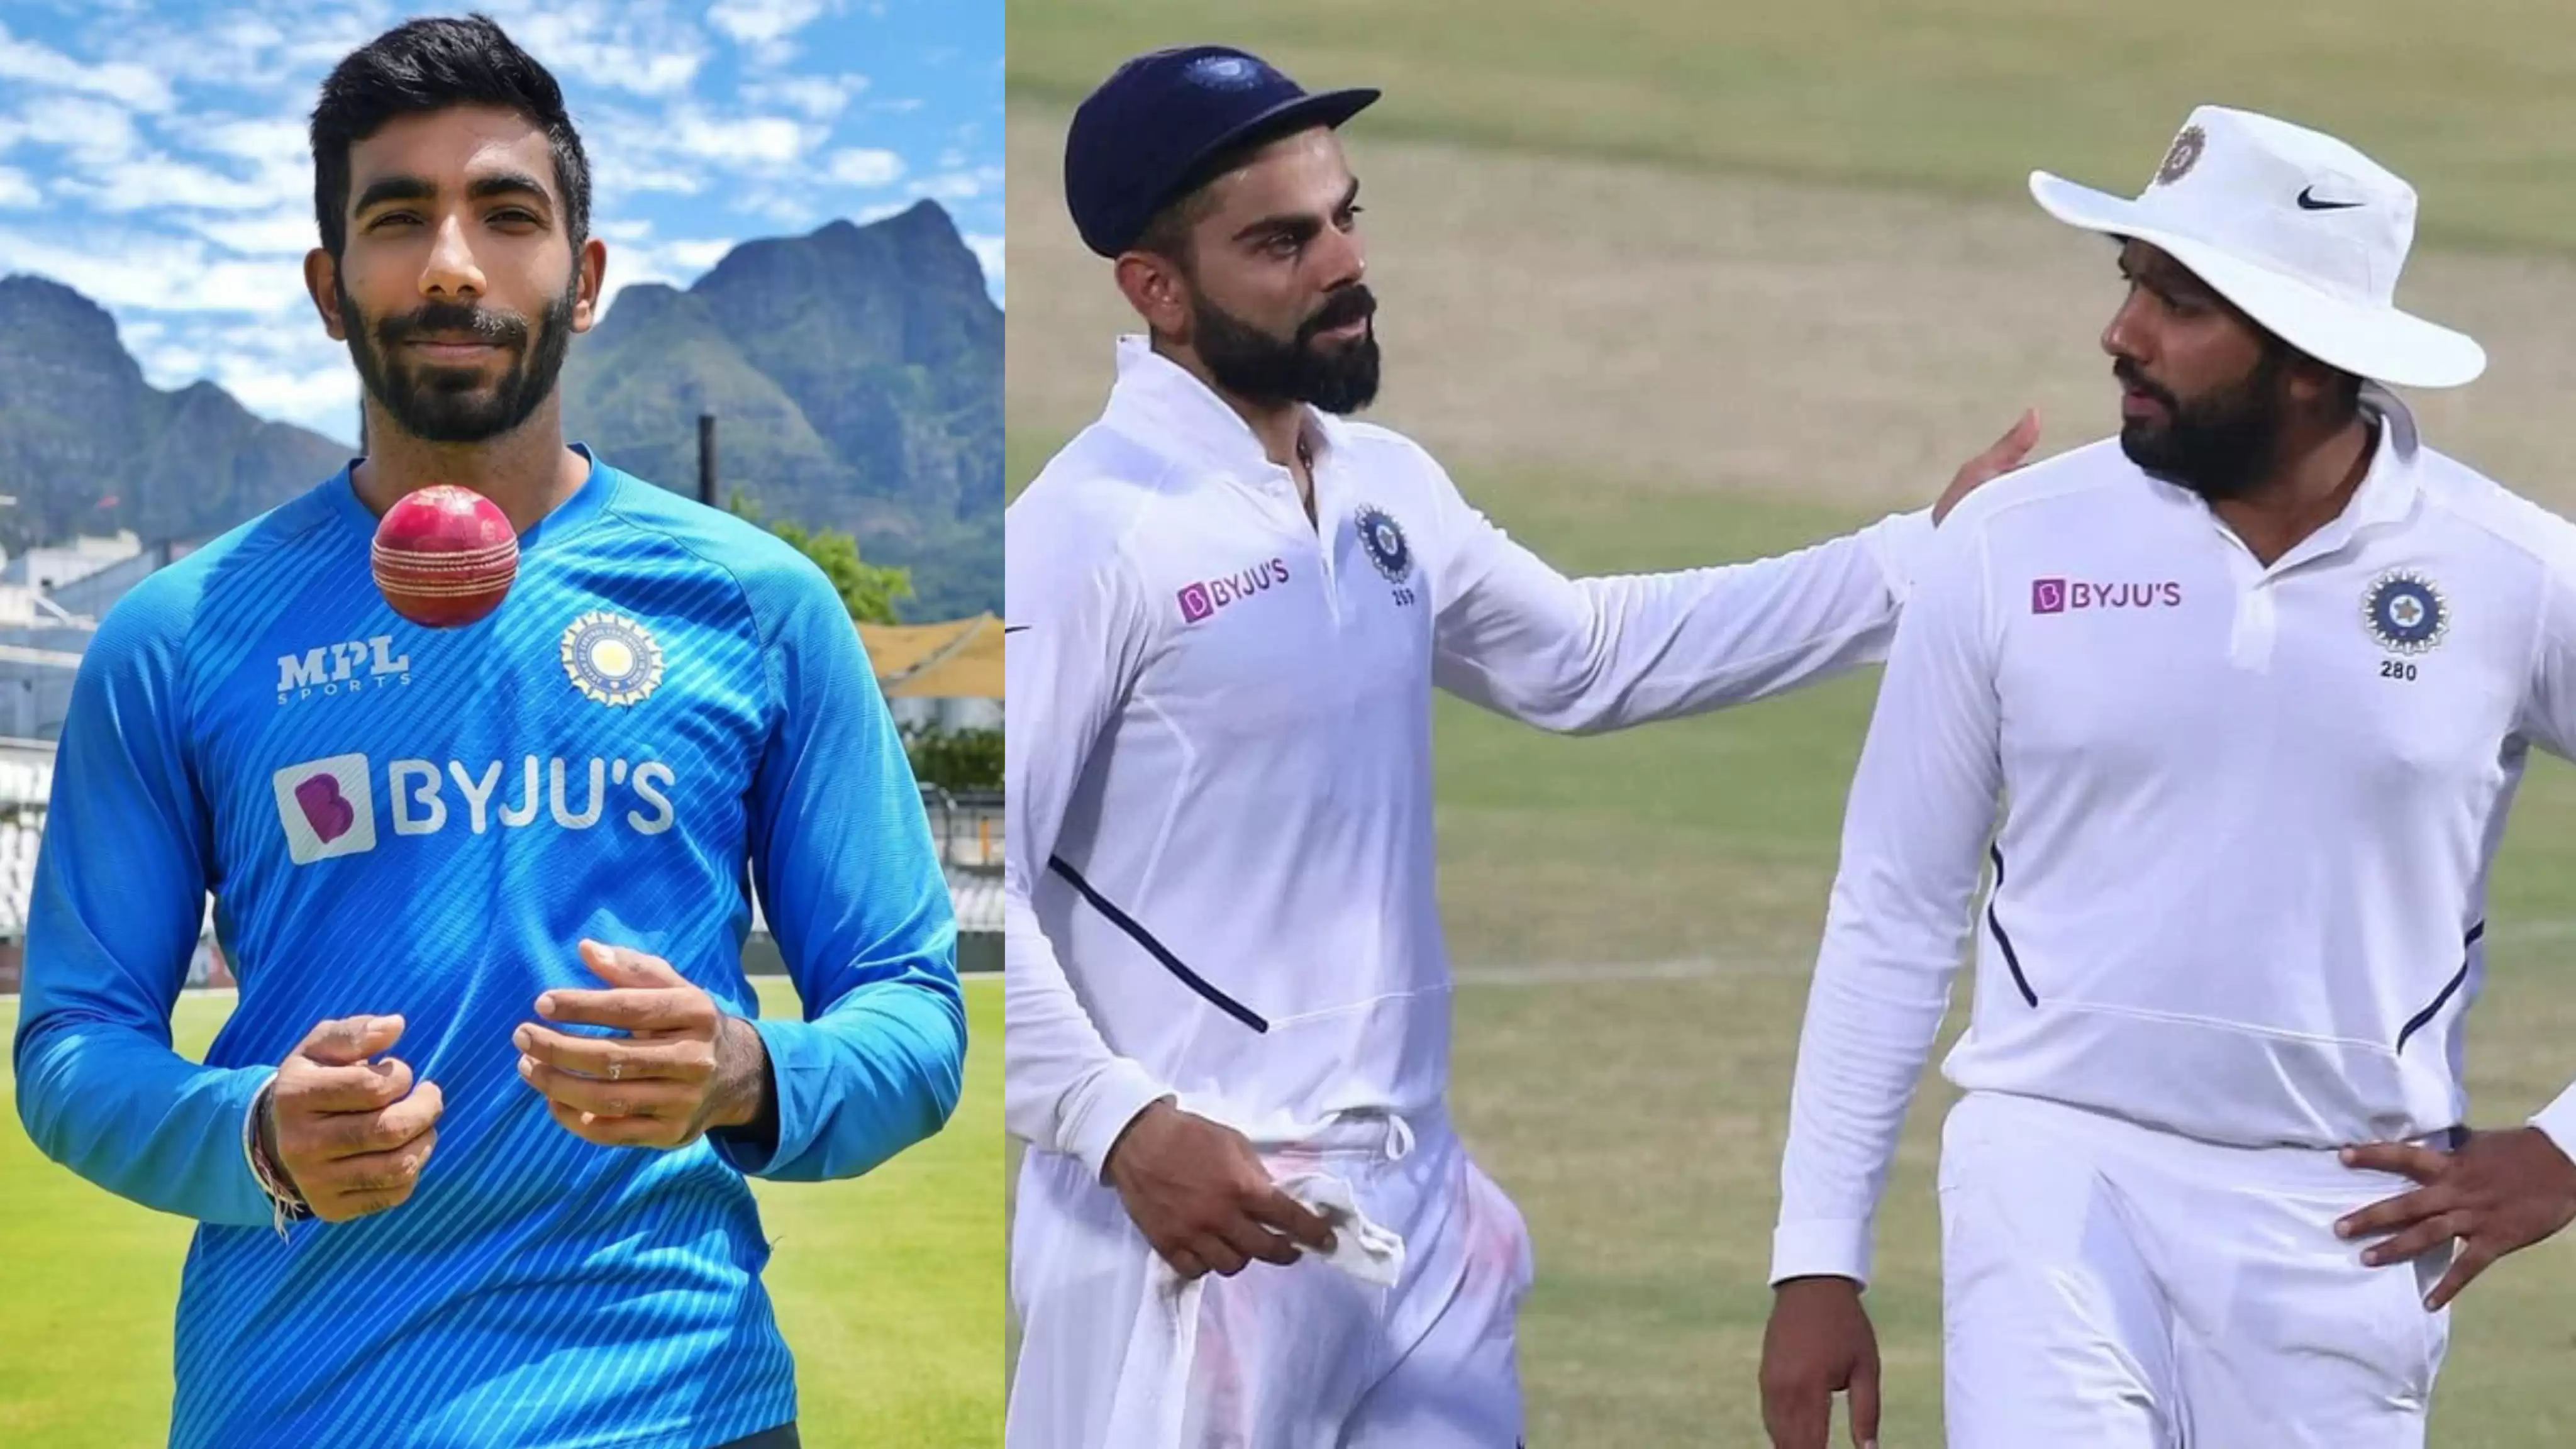 5 players who could become the next Test captain of India